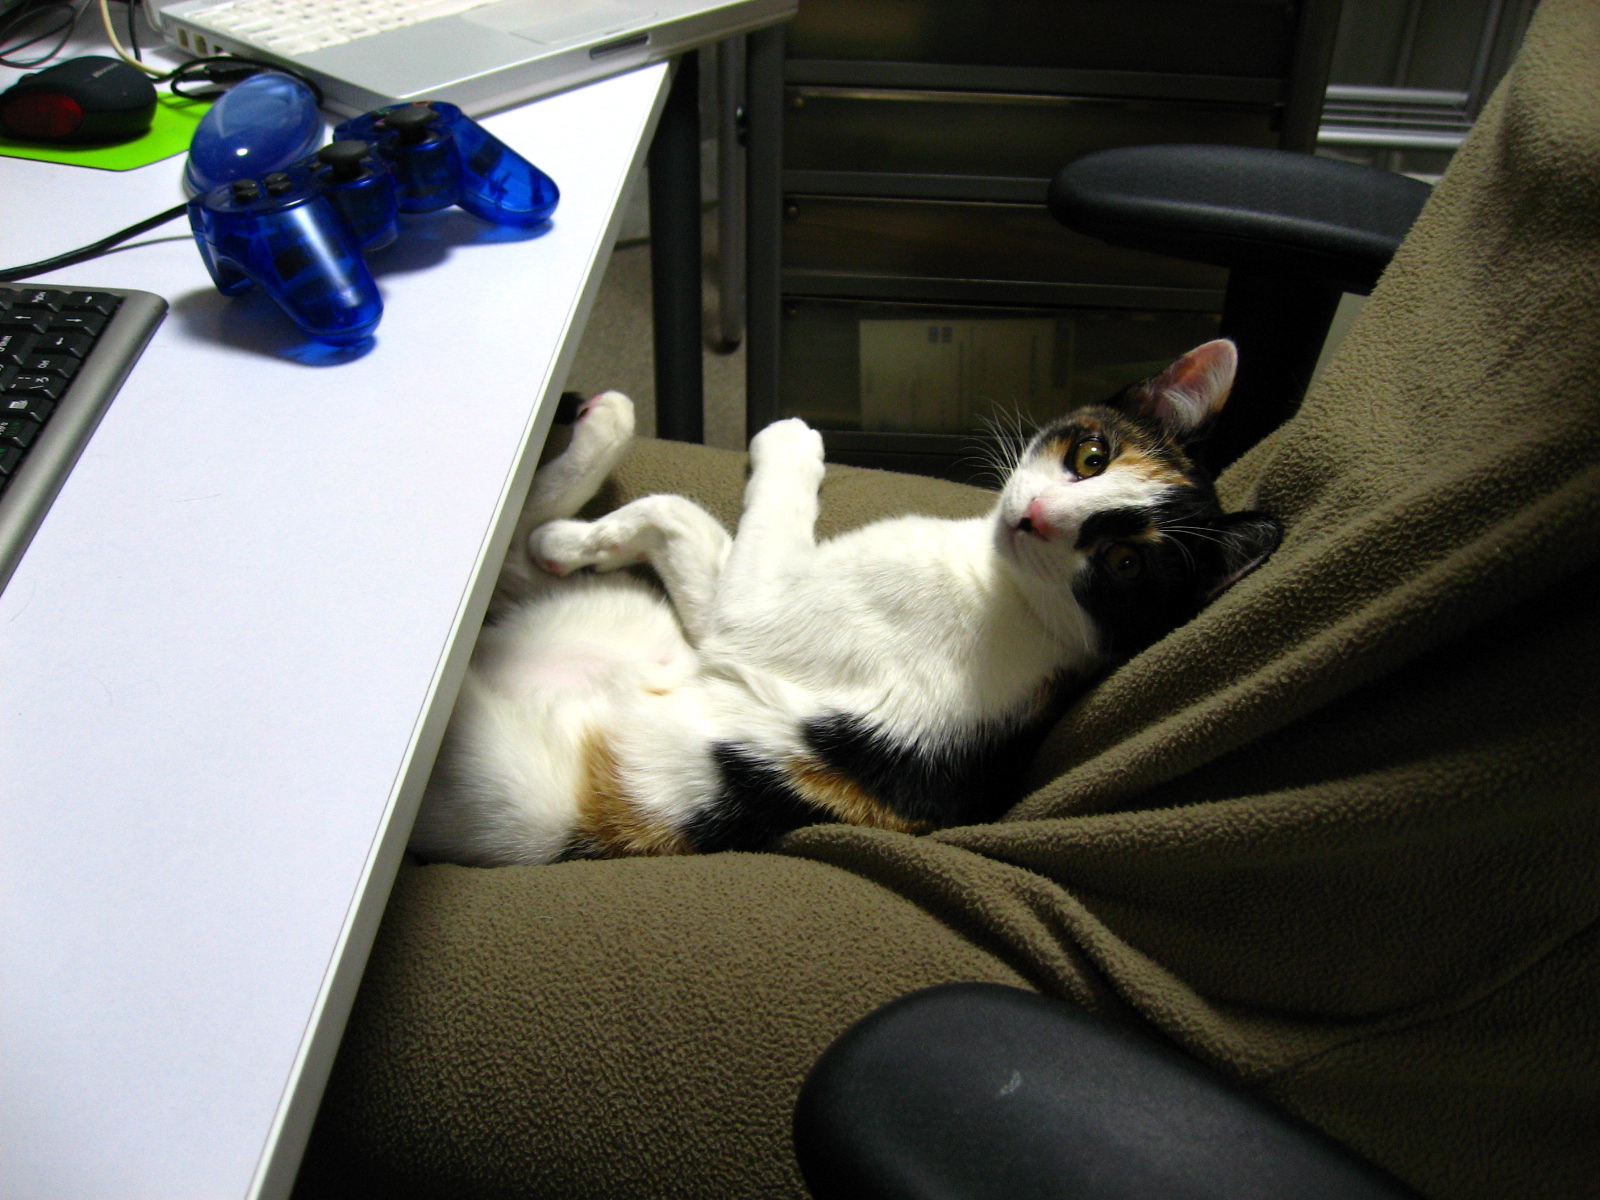 a cat is sleeping in the arm of a chair near a computer desk